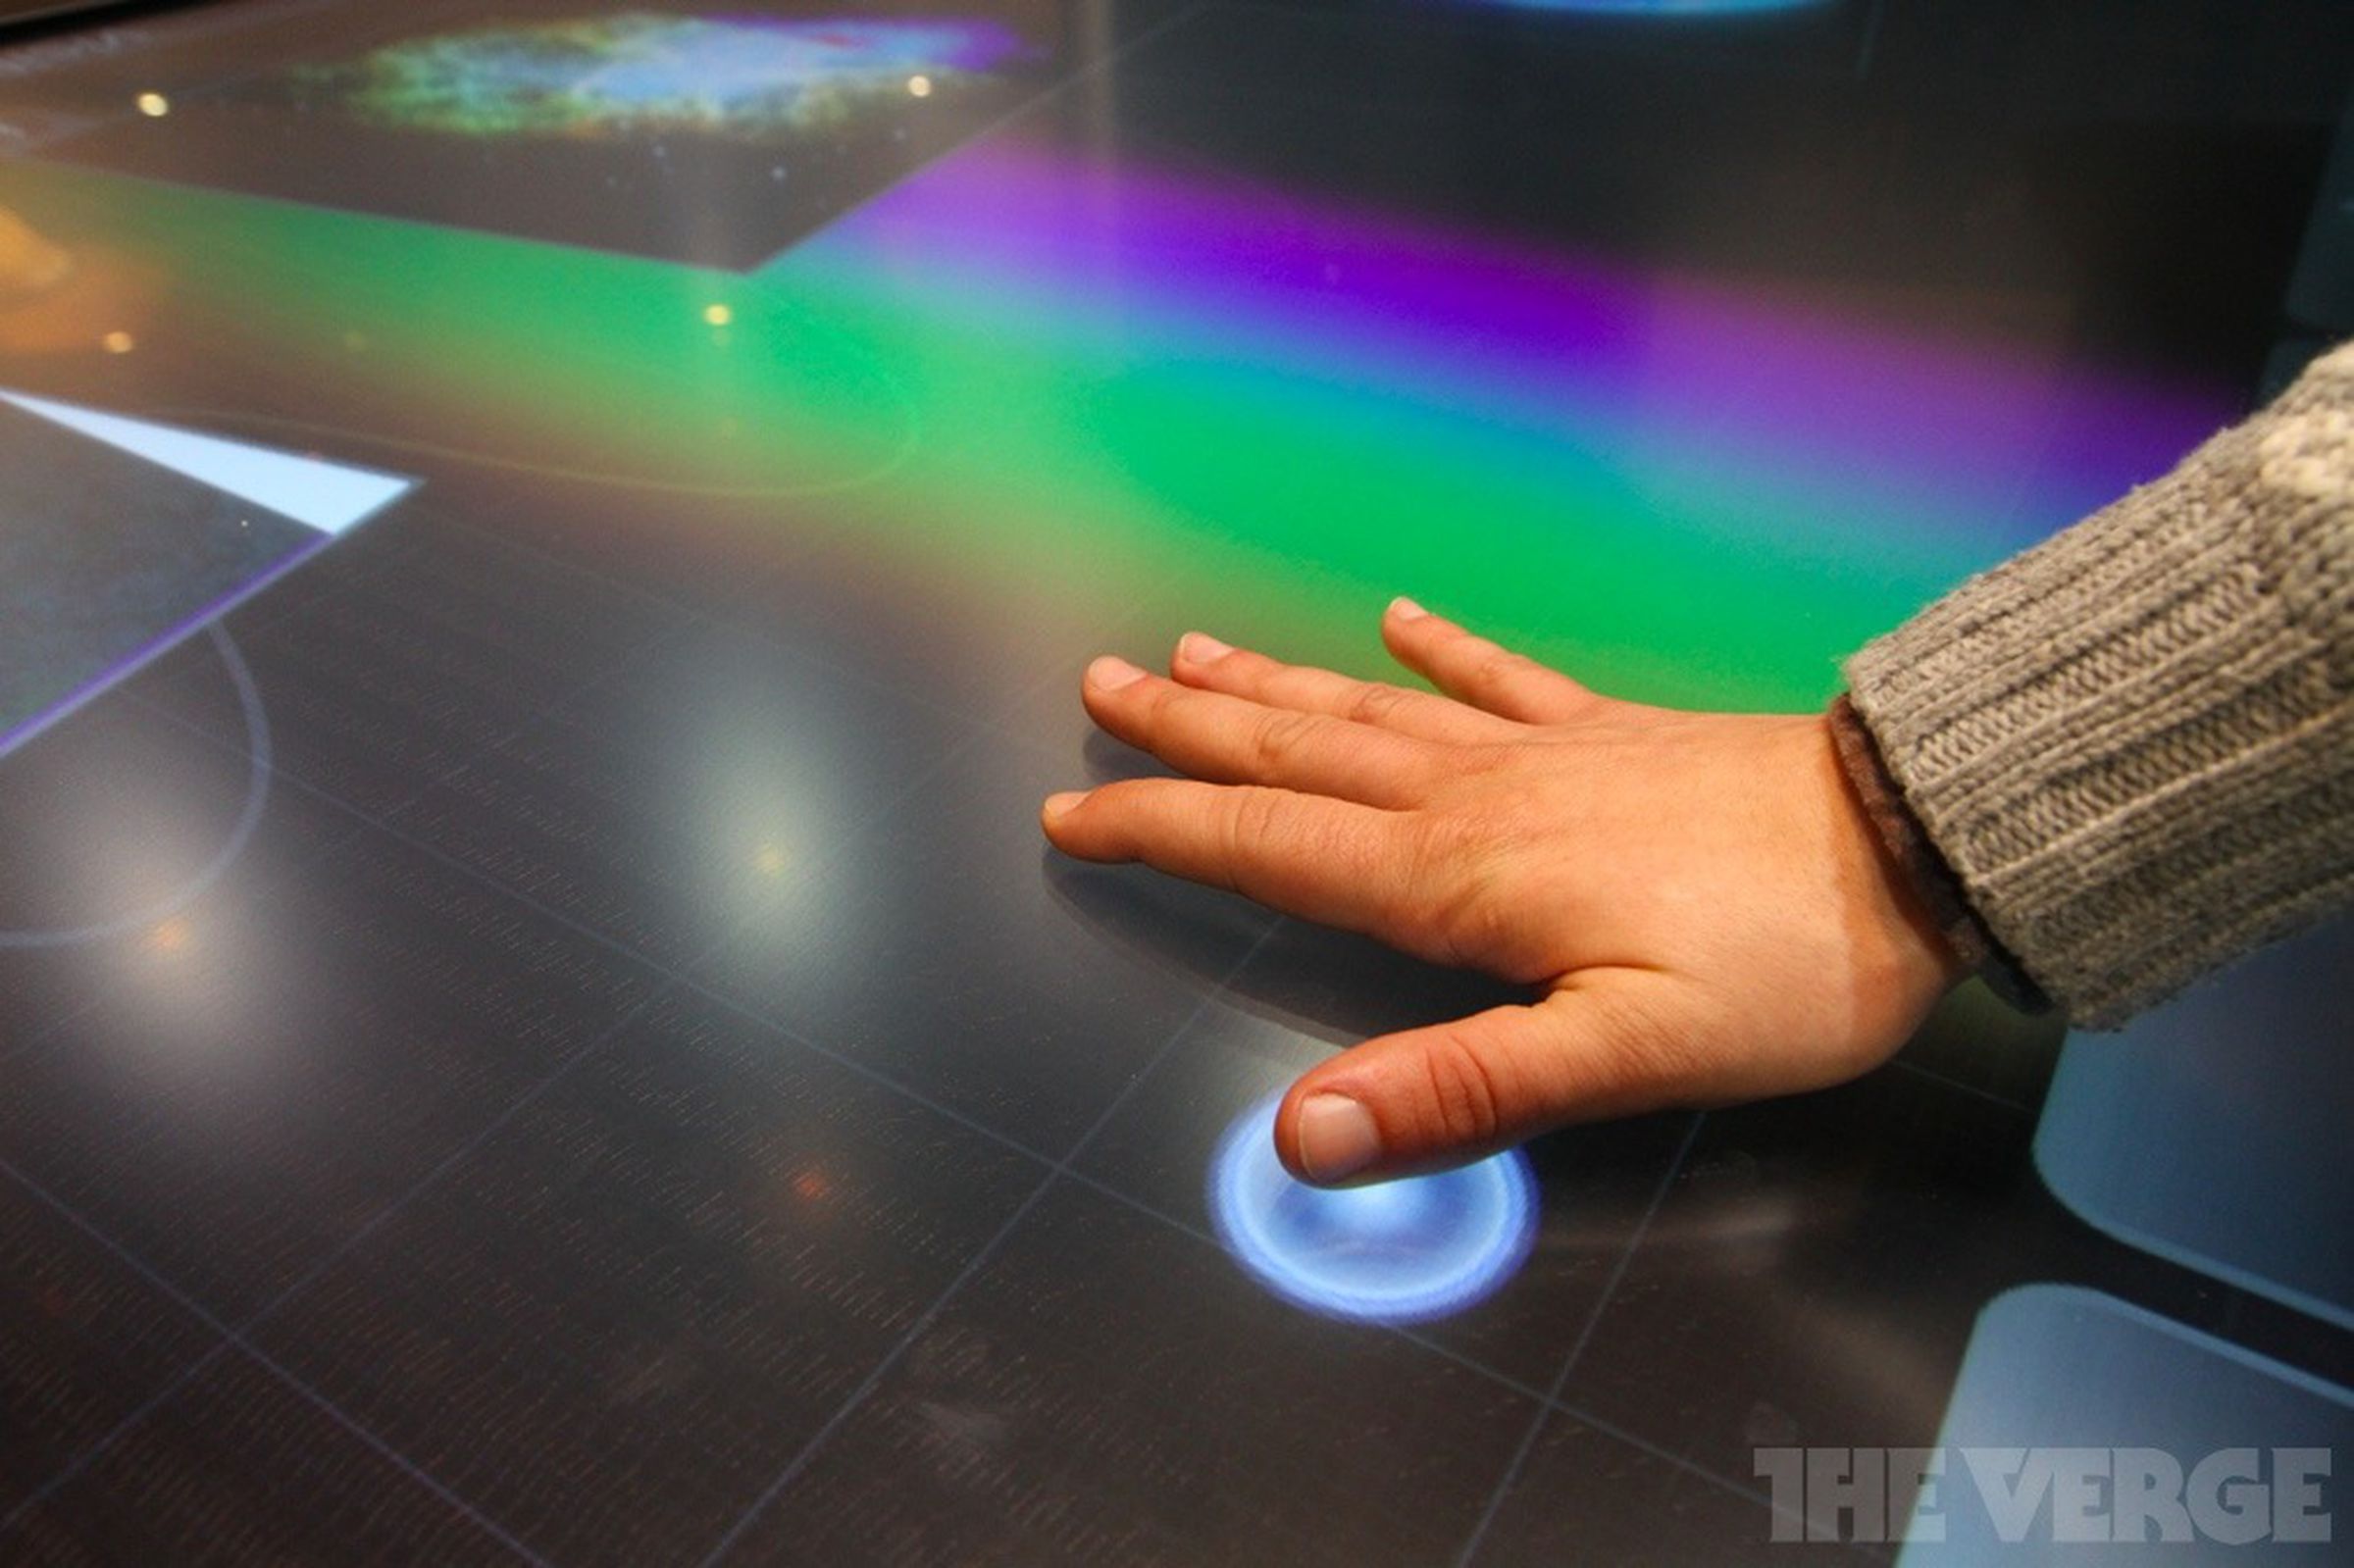 3M 84-inch multitouch table